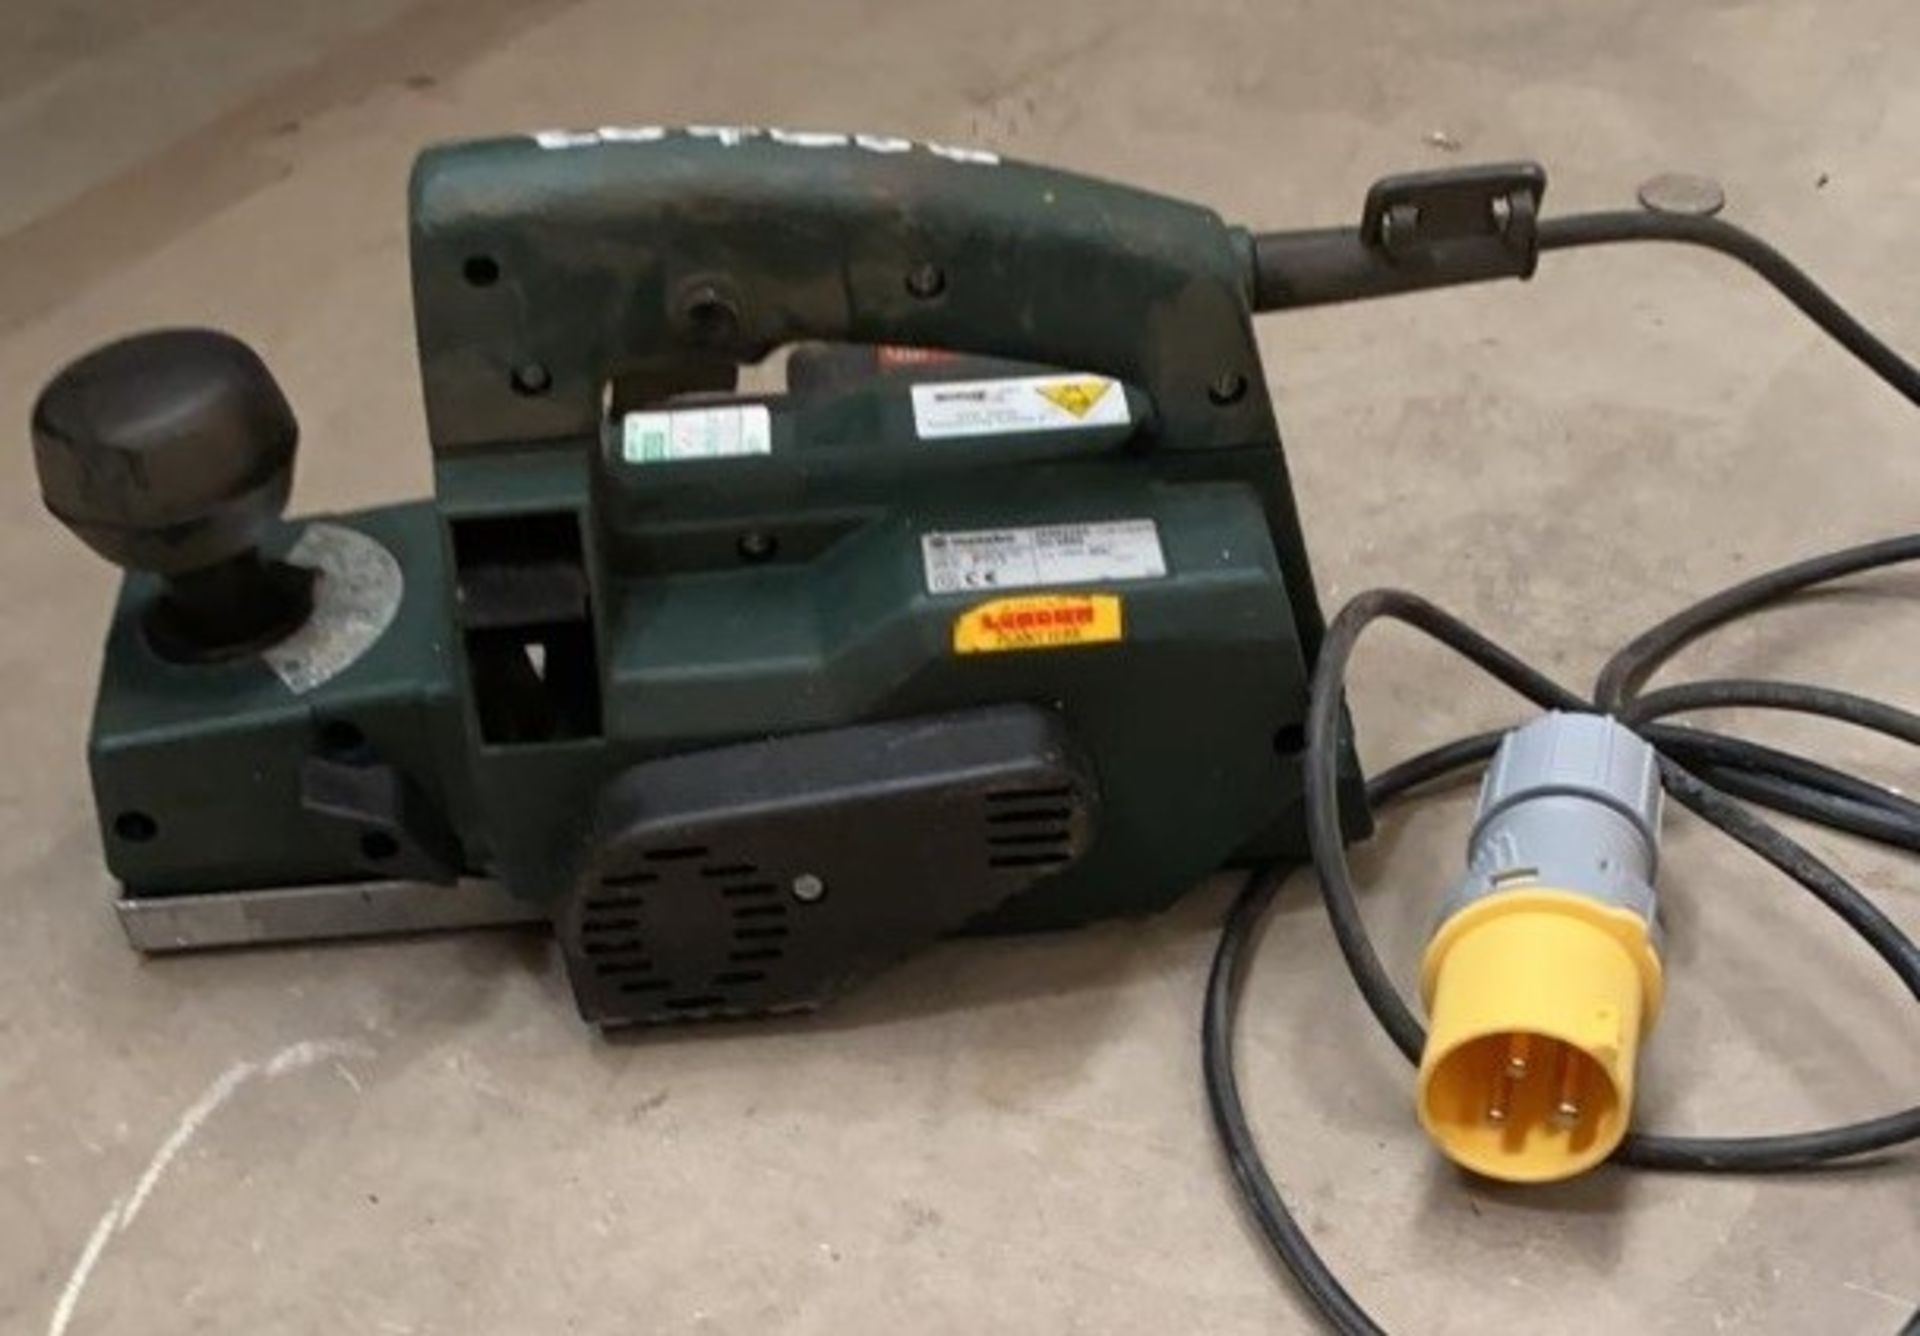 1 x Metabo 110V Planer - Used, Recently Removed From A Working Site - CL505 - Ref: TL018 - Location: - Image 3 of 6